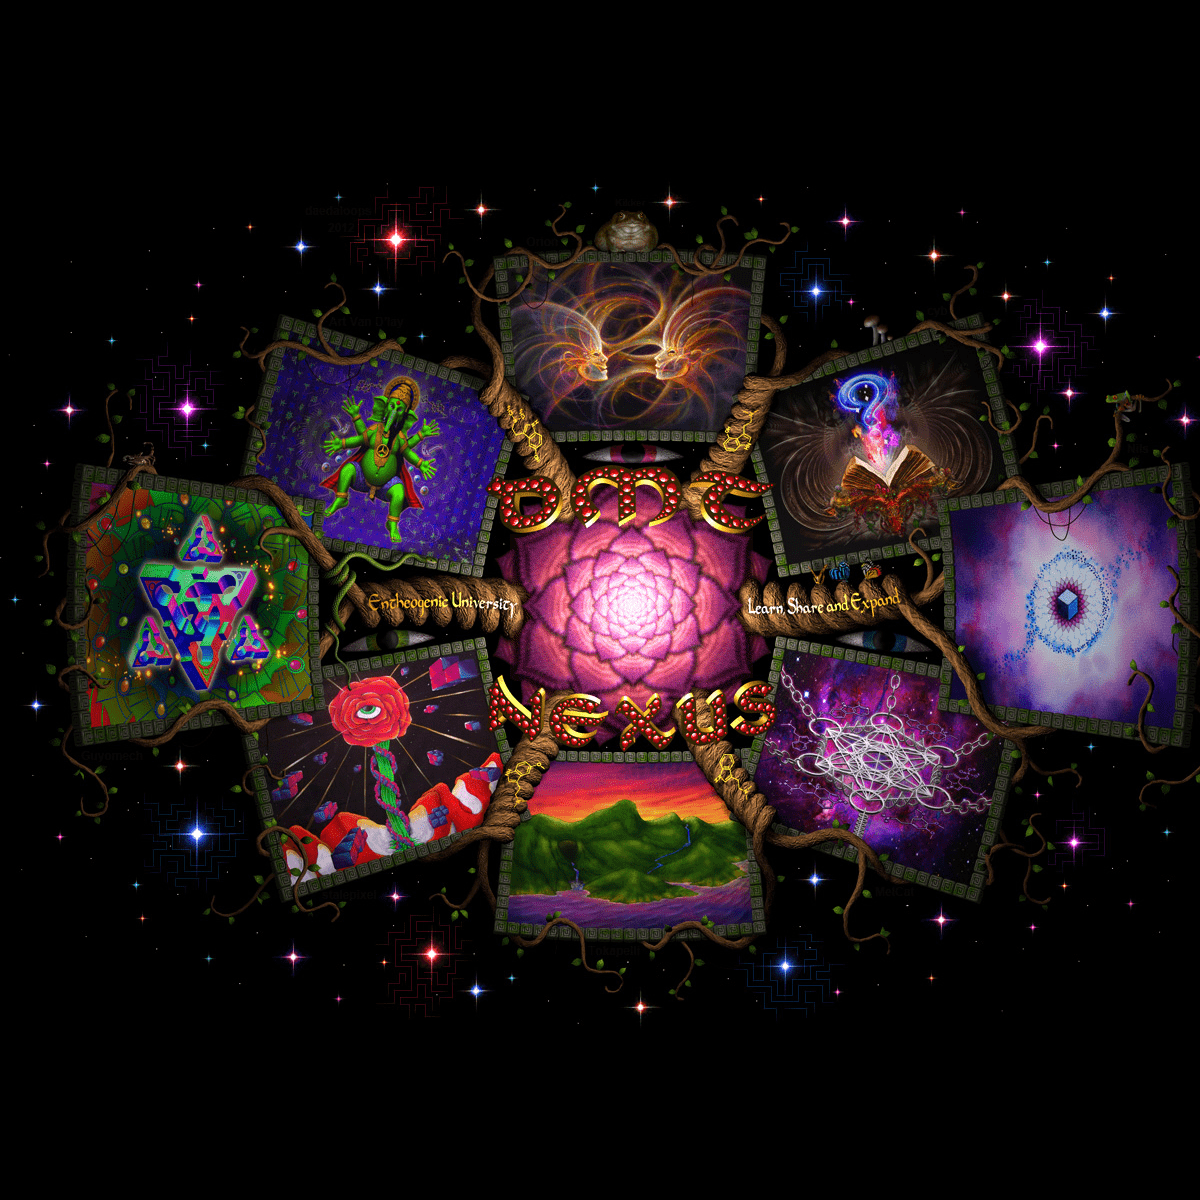 A complete backup of dmt-nexus.me